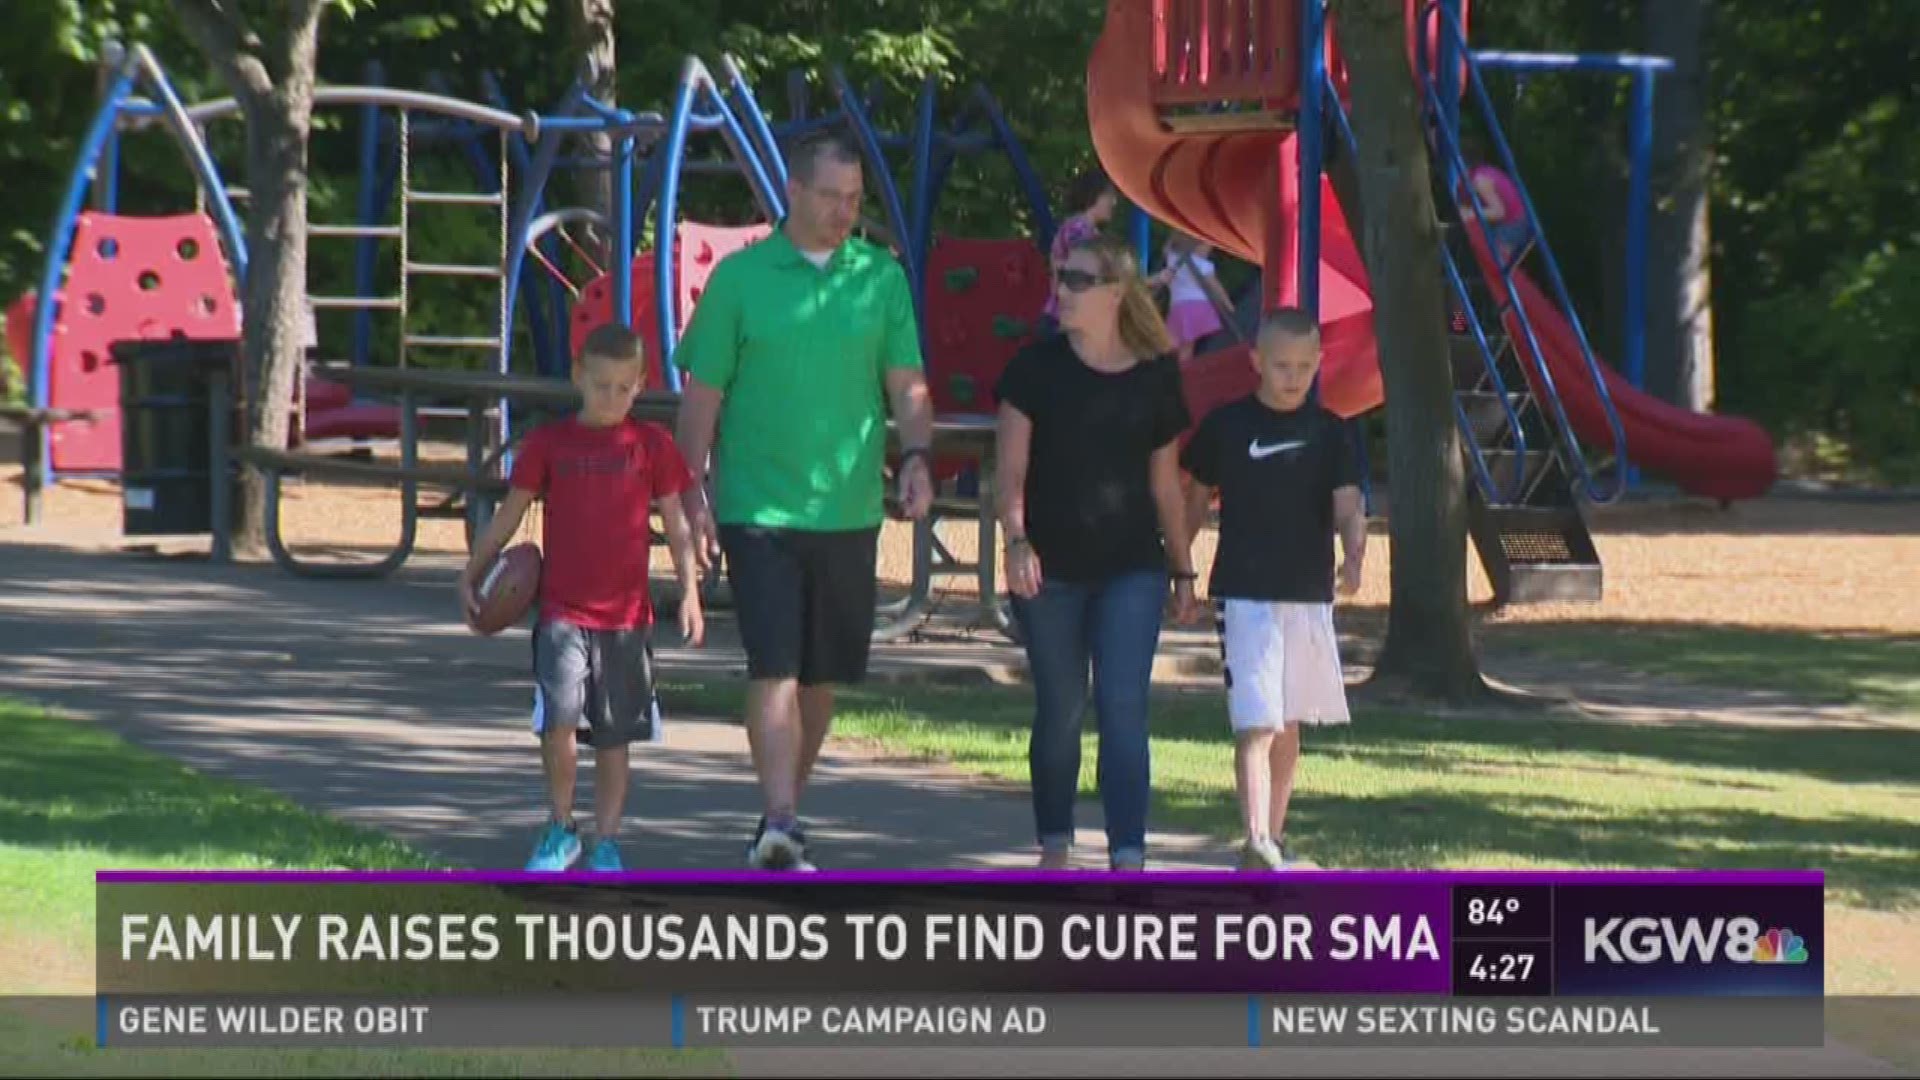 Family raises thousands to find cure for SMA